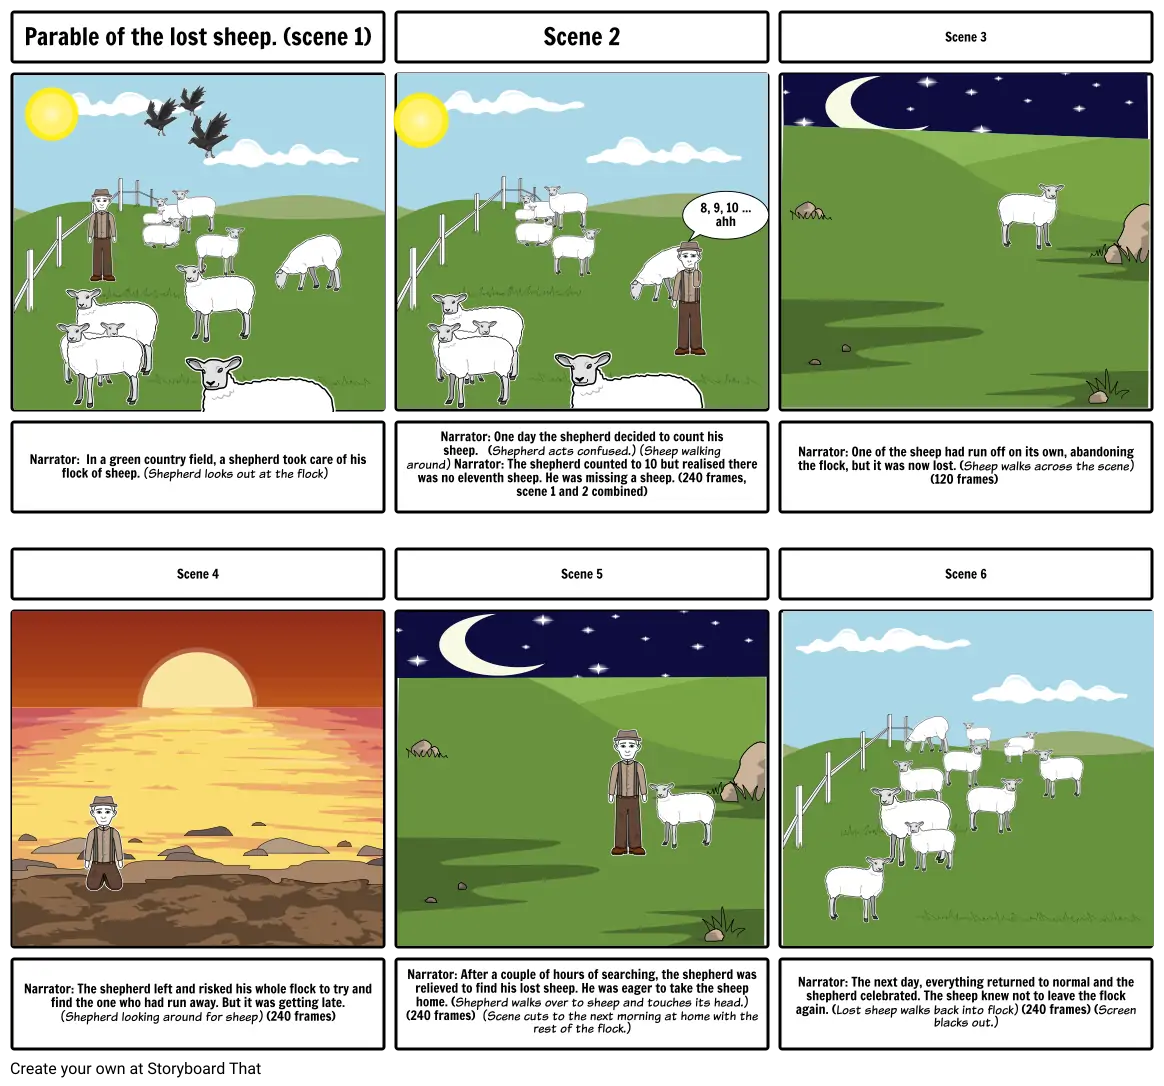 Parable of the lost sheep